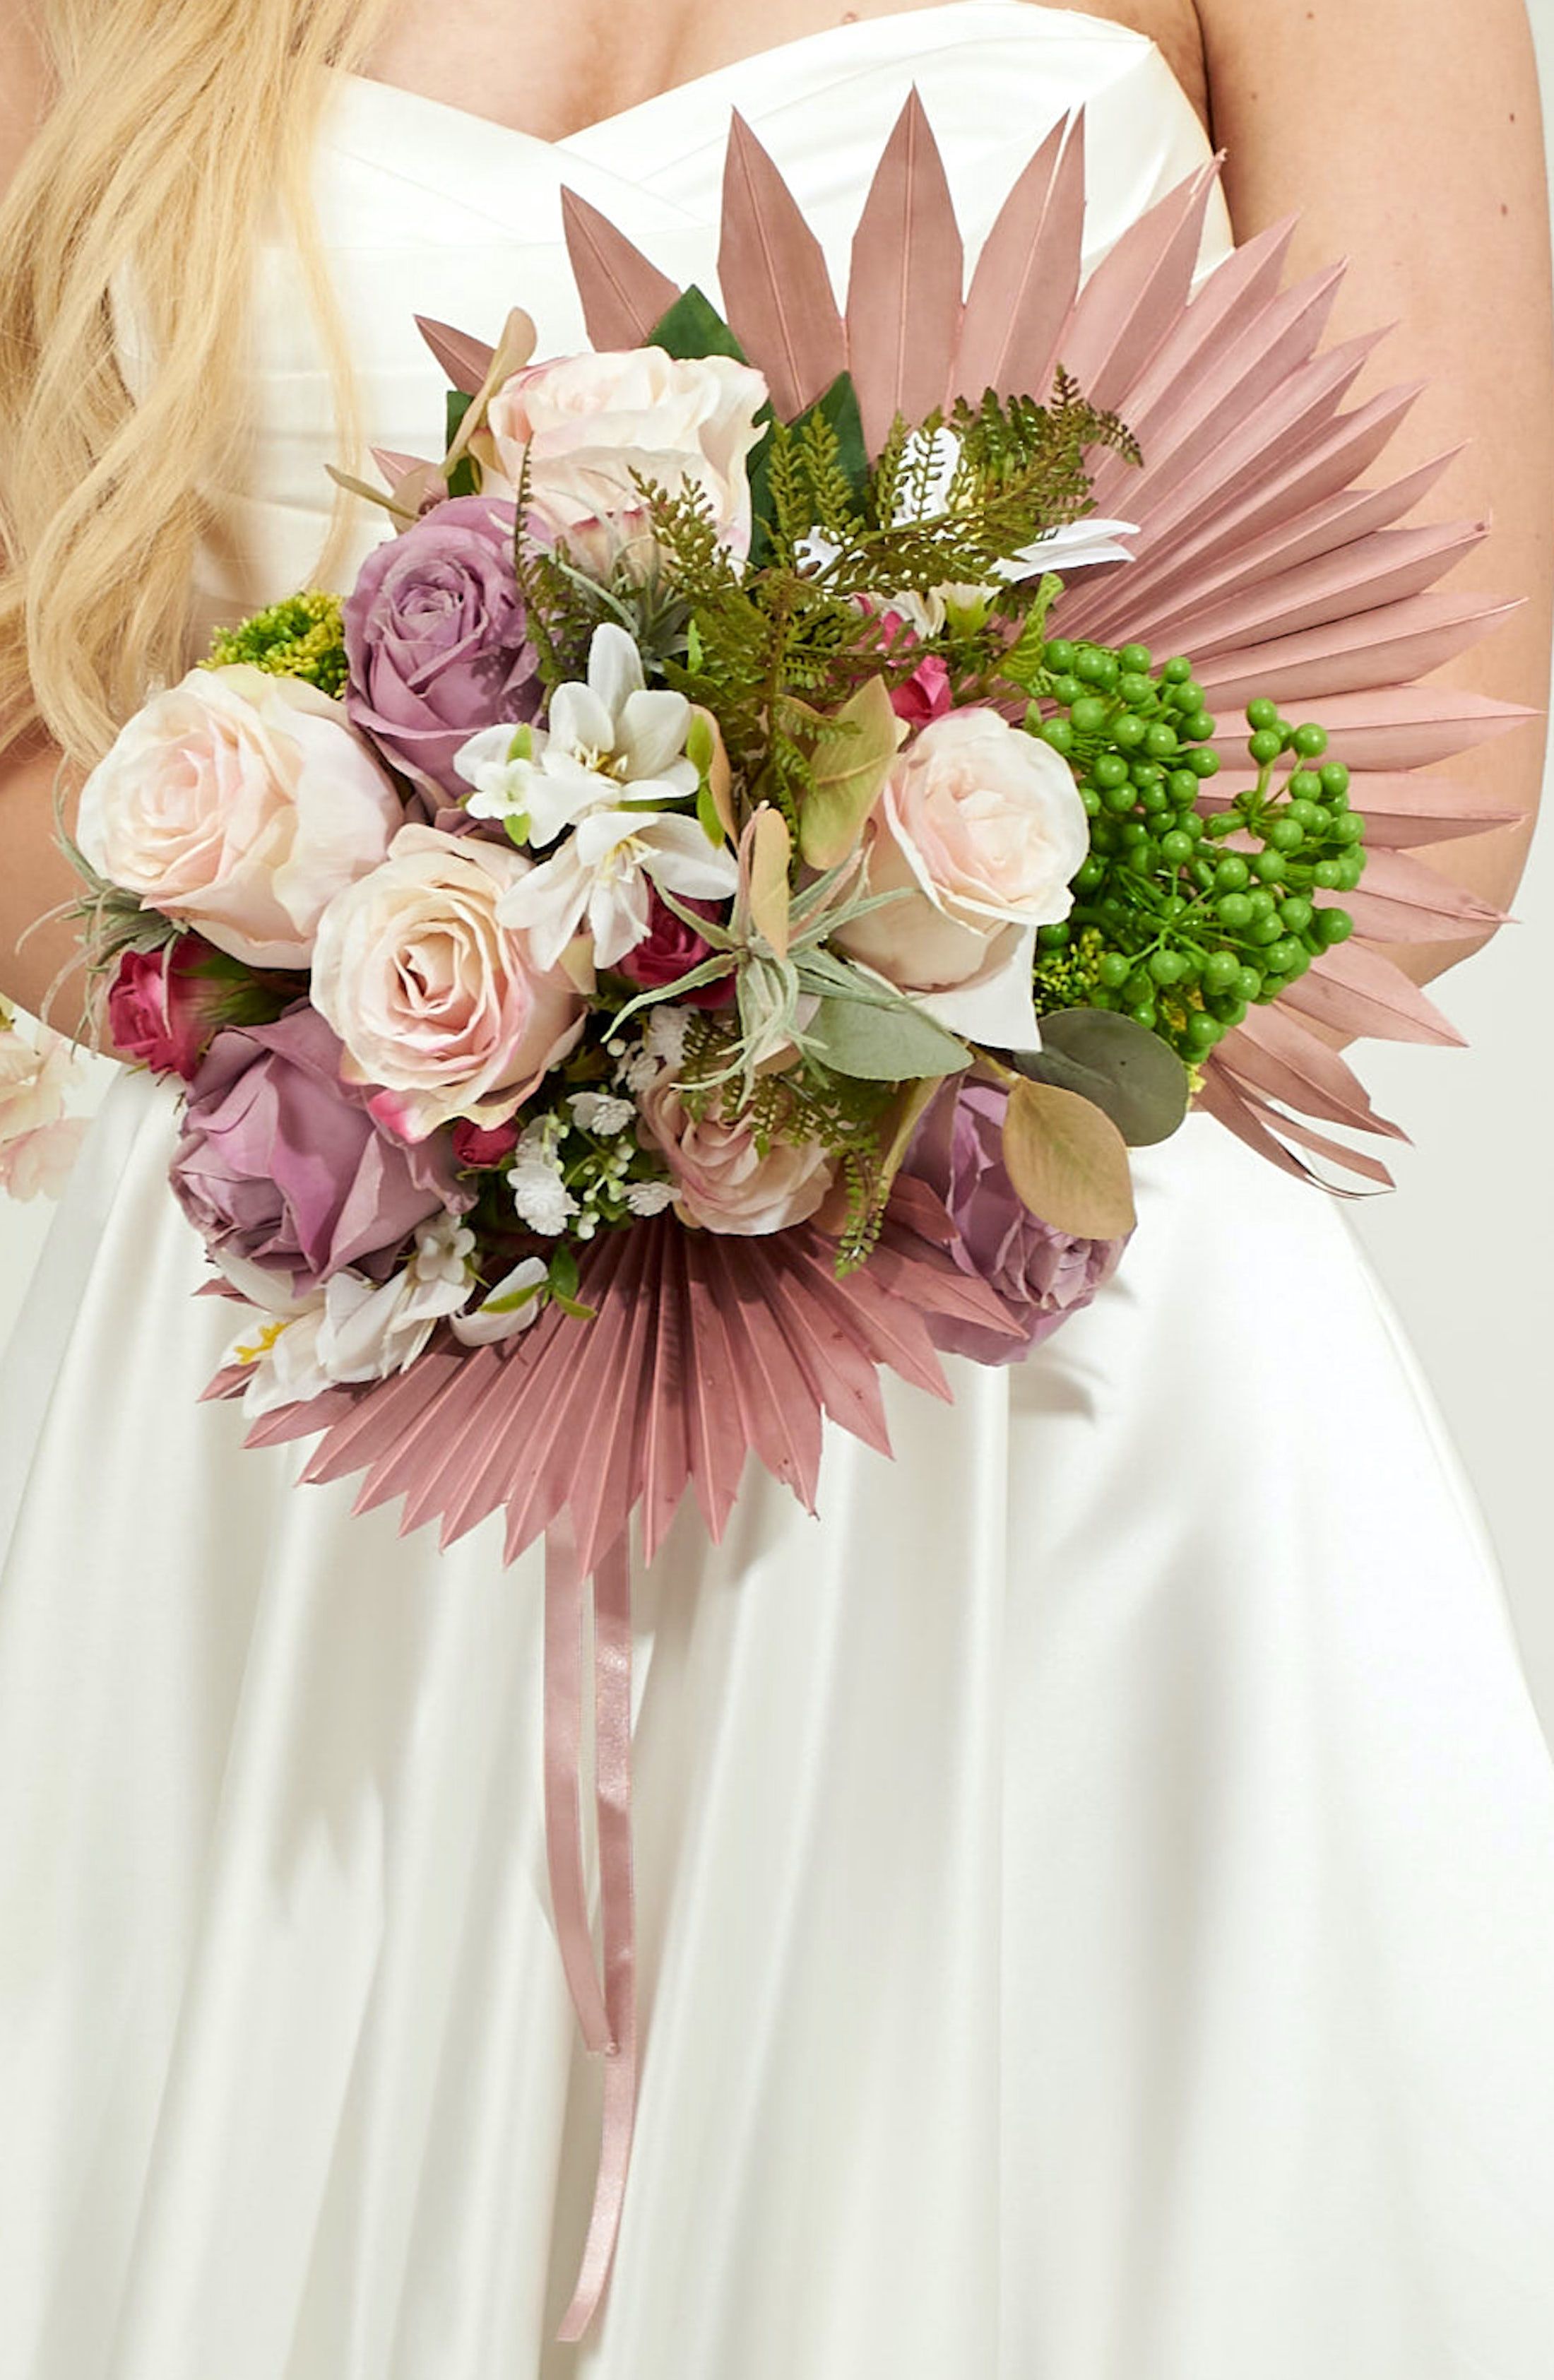 Artificial flowers bouquet with dried palm spears